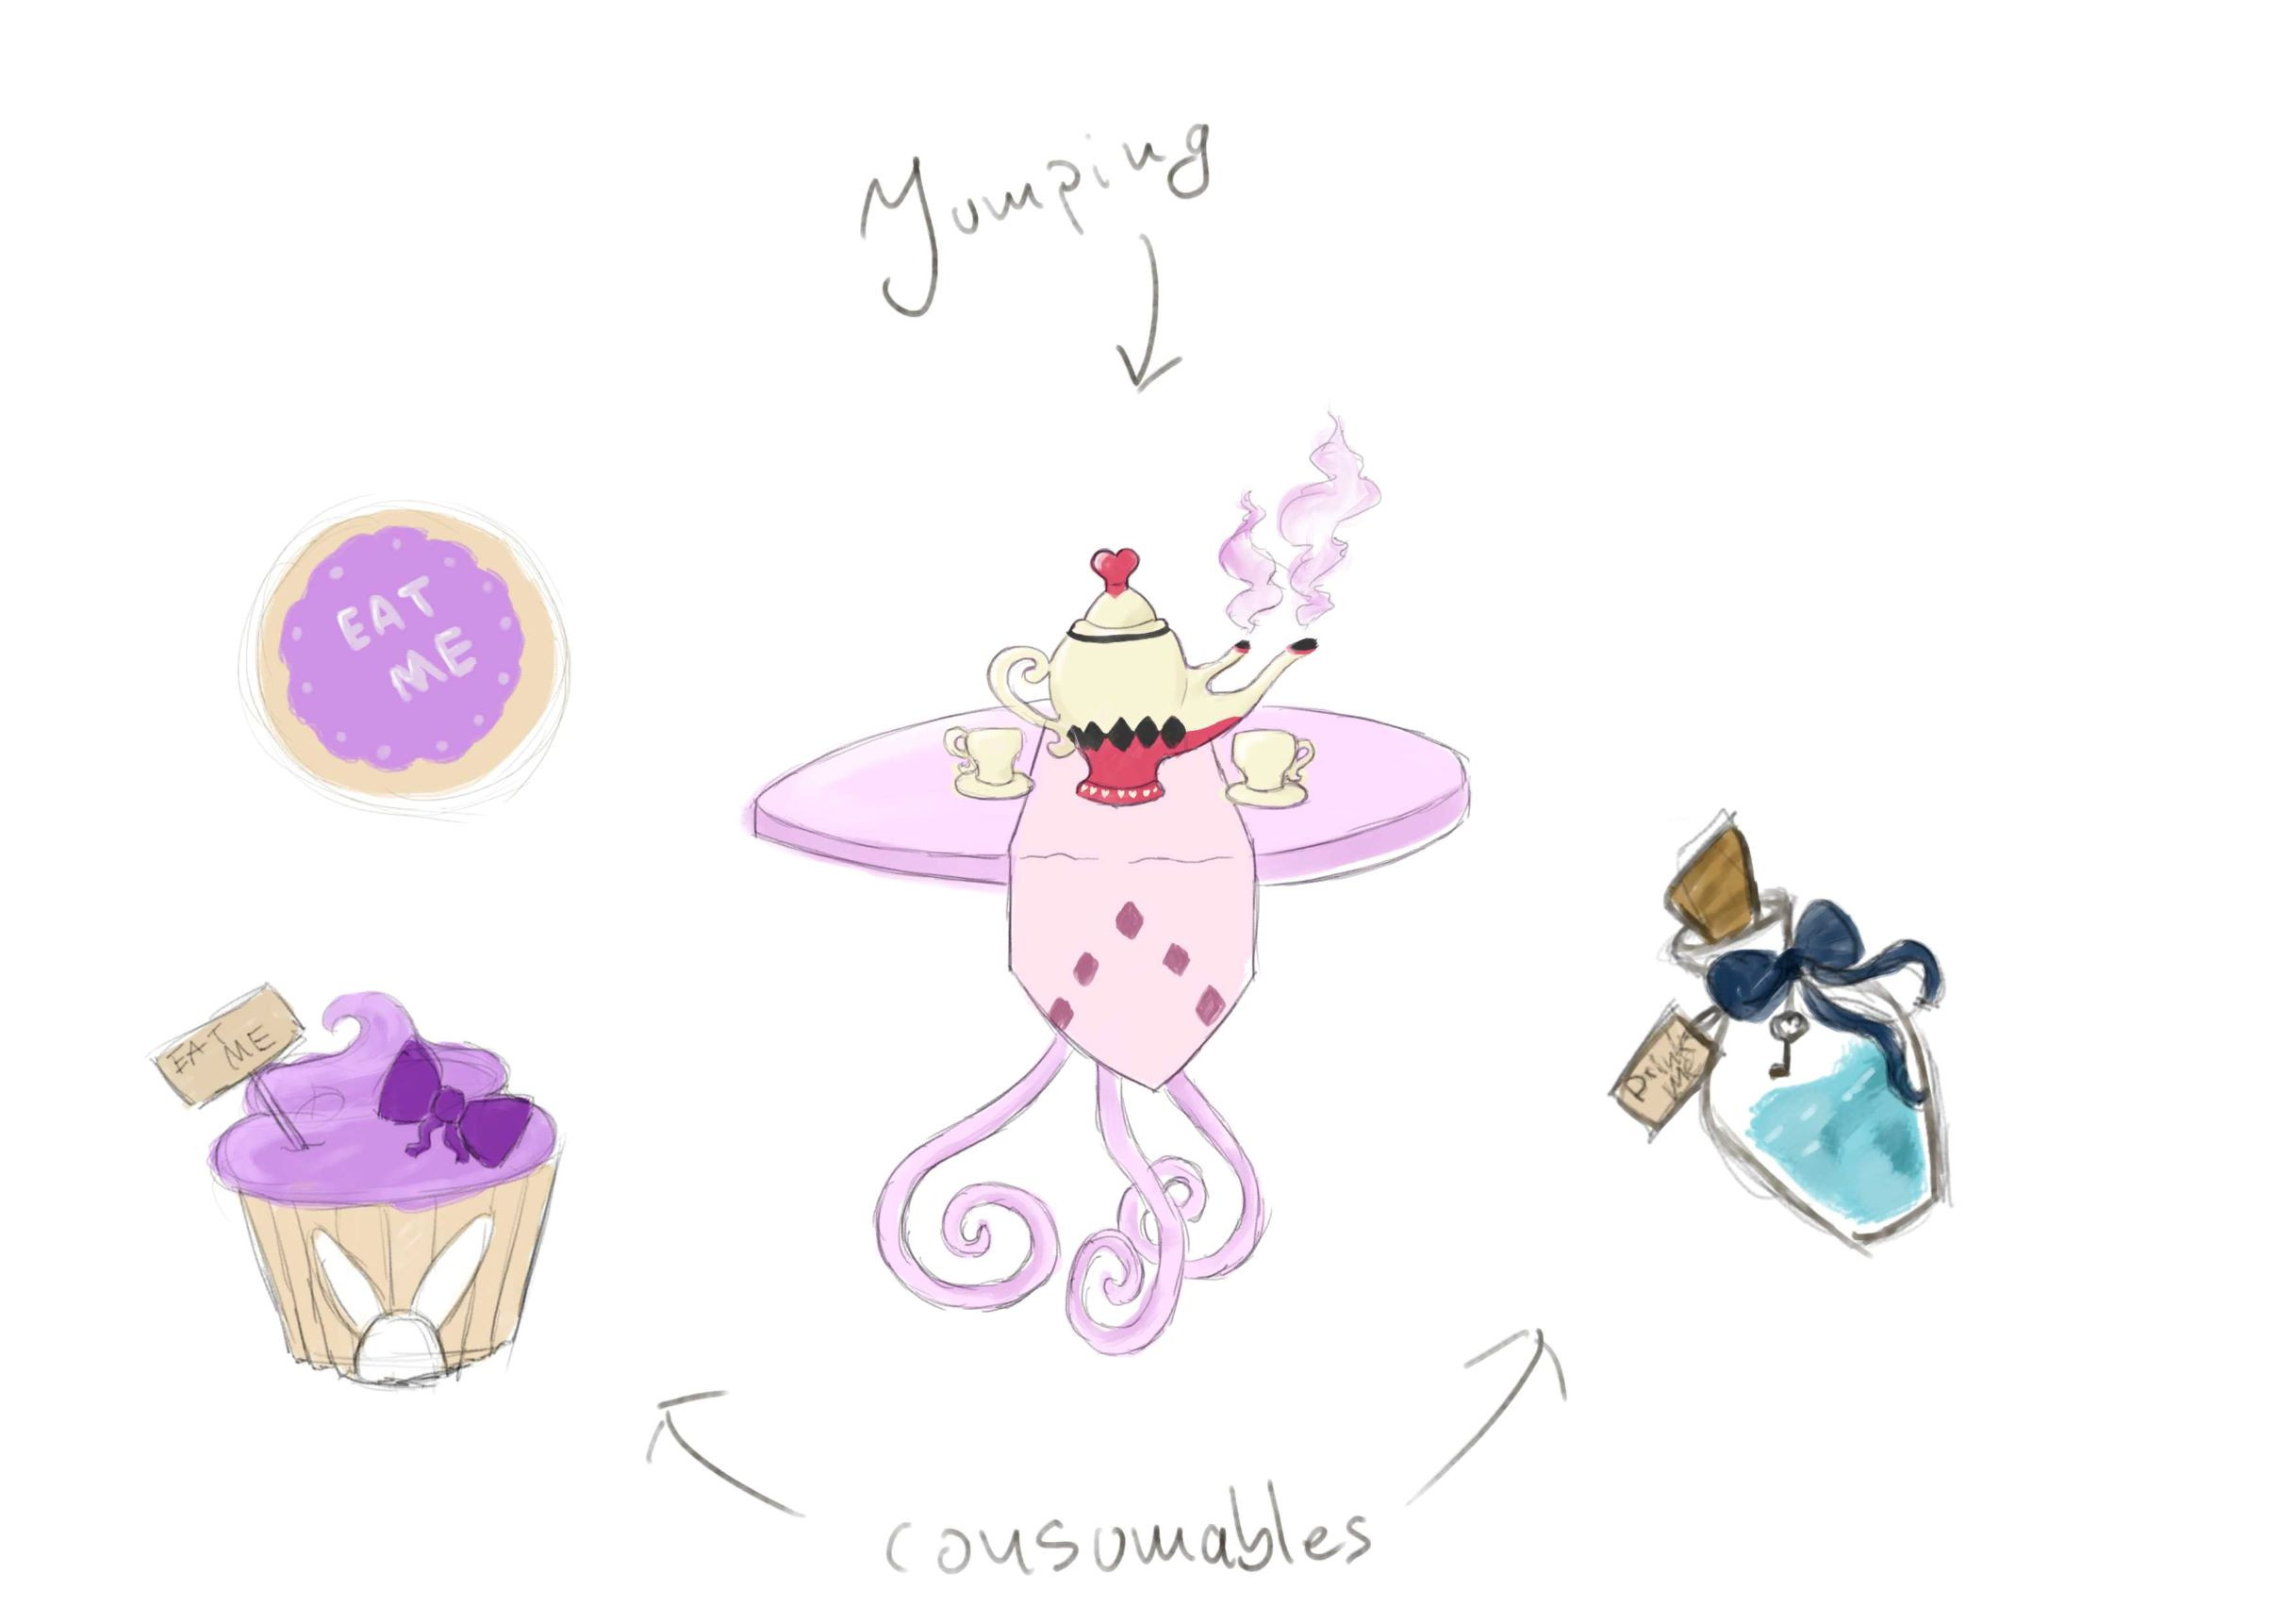 Concept for the potion is on the left